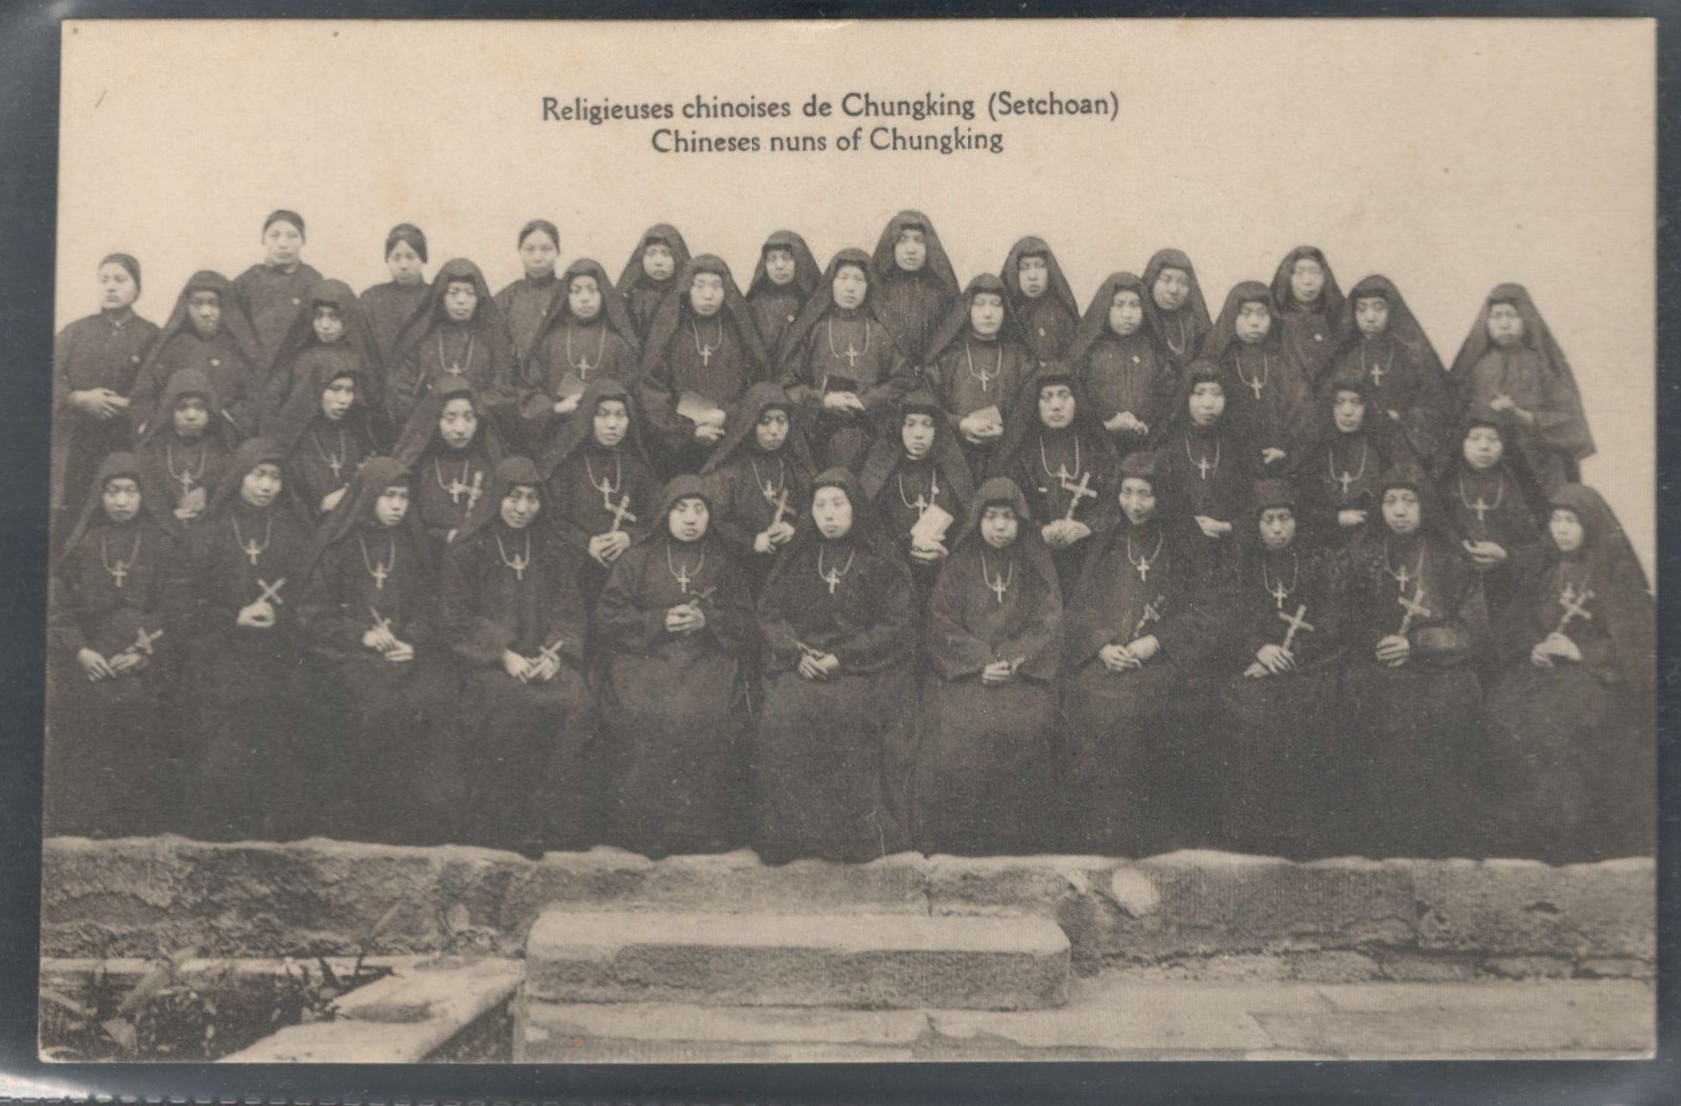 FRENCH EARLY UNUSED POSTCARD SHOWING CHINESE NUNS OF CHUNGKING